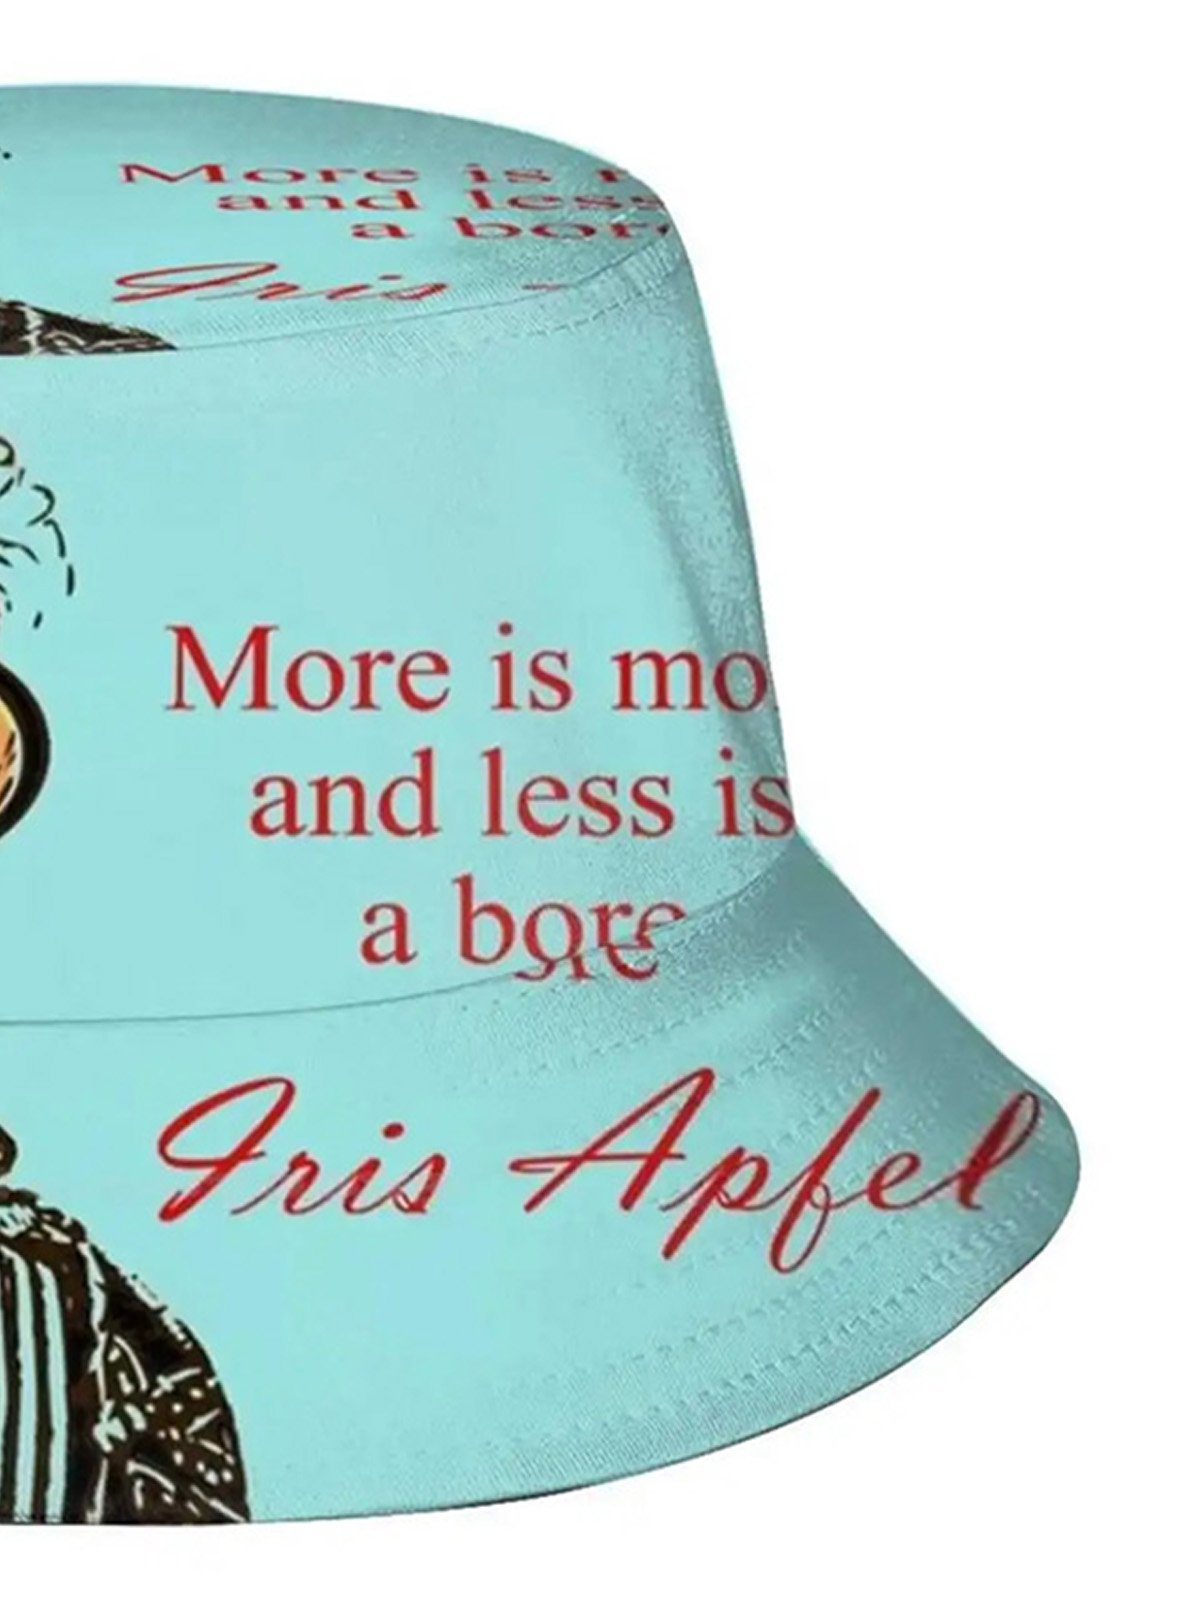 Men's Fashion Queen "More Is More, And Less Is Bore" Printed Bucket Hat